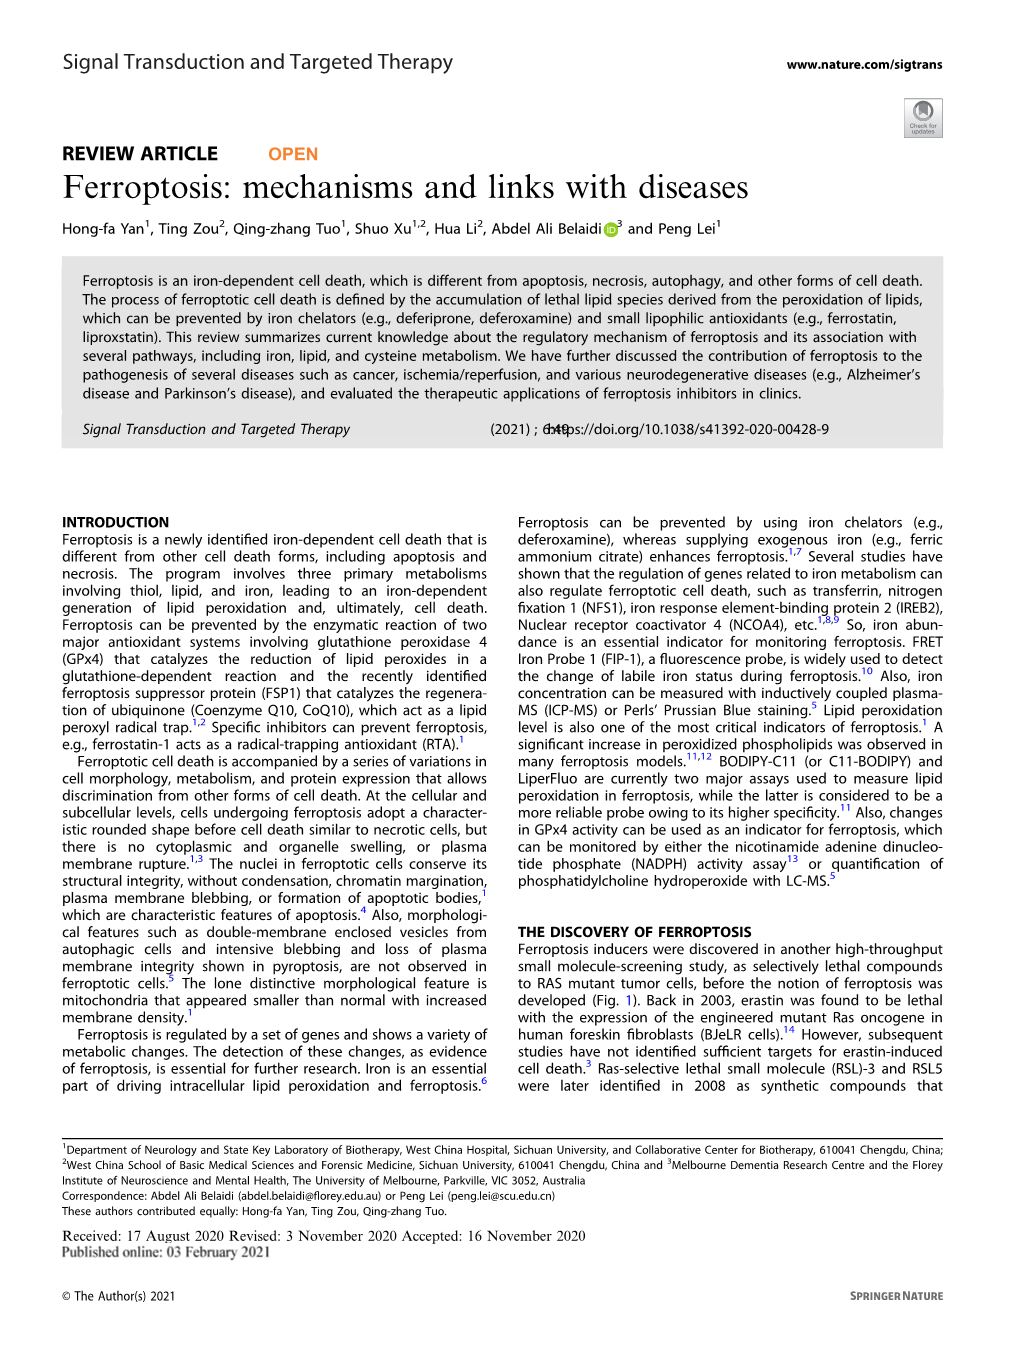 Ferroptosis: Mechanisms and Links with Diseases